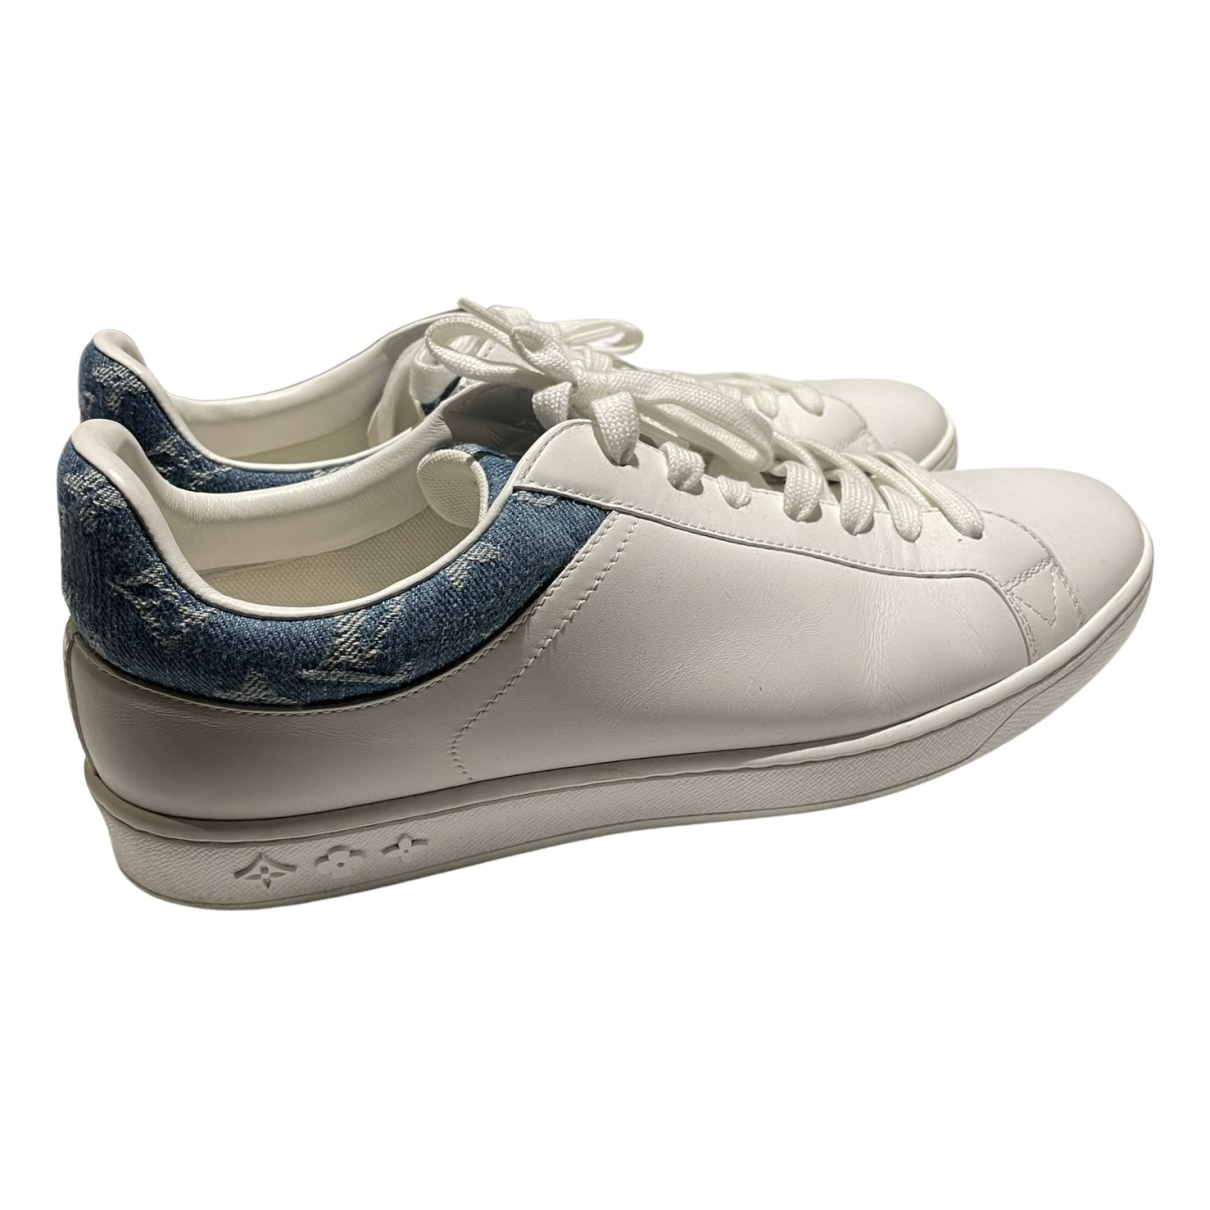 LOUIS VUITTON LUXEMBOURG LINE SNEAKERS MENS WHITE GRAY MONOGRAM